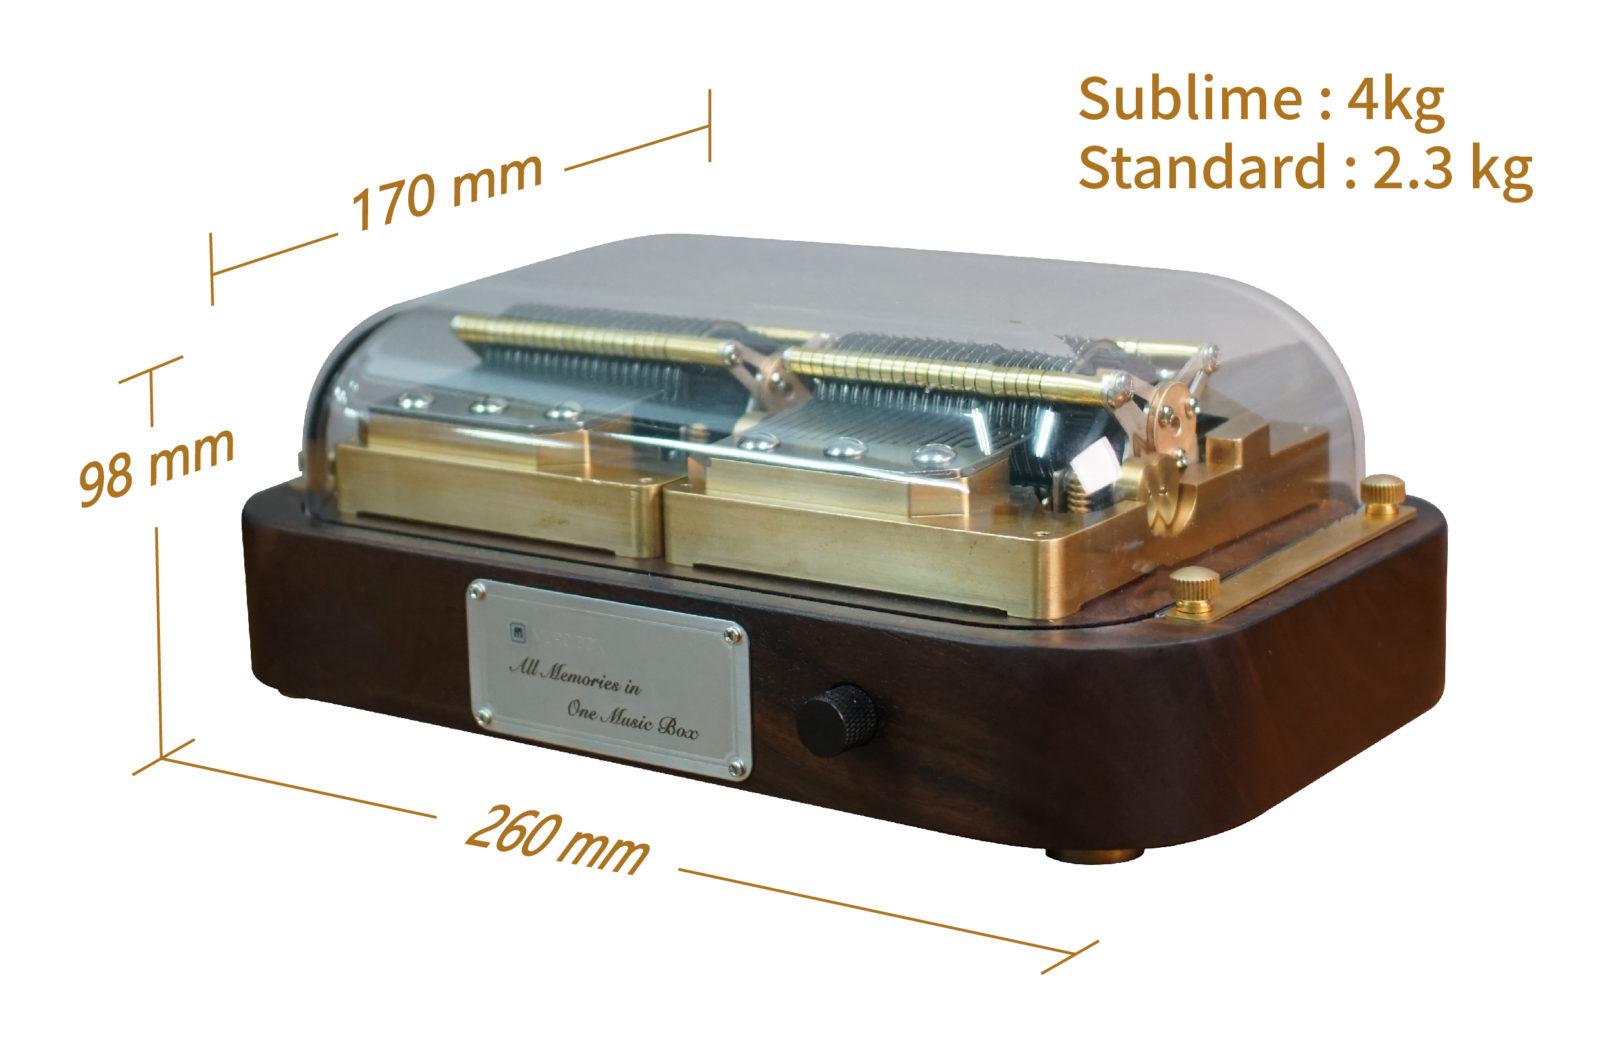 Muro Box-N40 measures 260 mm long x 170 mm wide x 98 mm high. The N40 Mufeng version weighs 4 kg (as shown in the image), and the N40 standard version weighs 2.3 kg. Both models are substantial.